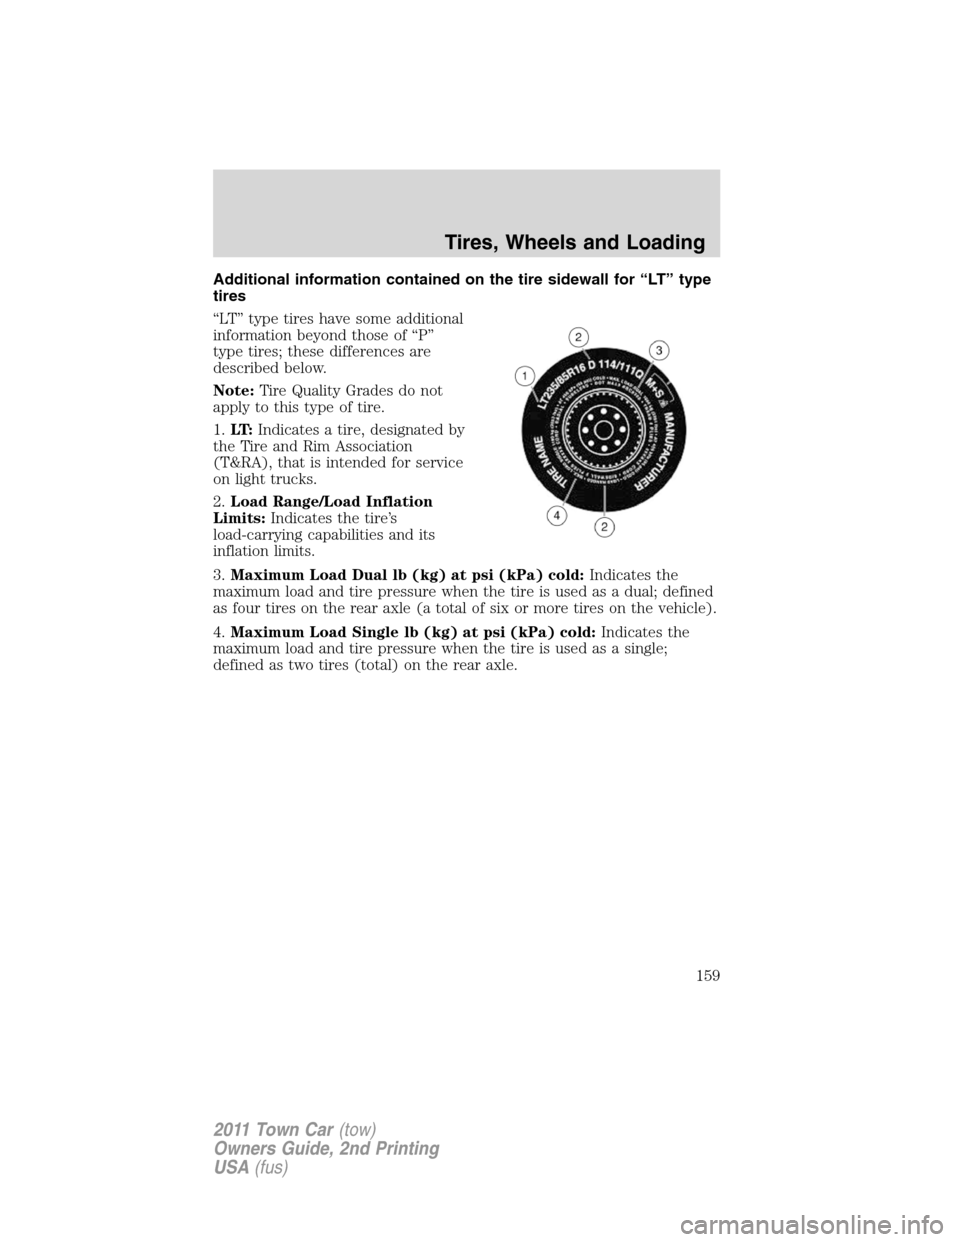 LINCOLN TOWN CAR 2011 User Guide Additional information contained on the tire sidewall for “LT” type
tires
“LT” type tires have some additional
information beyond those of “P”
type tires; these differences are
described b